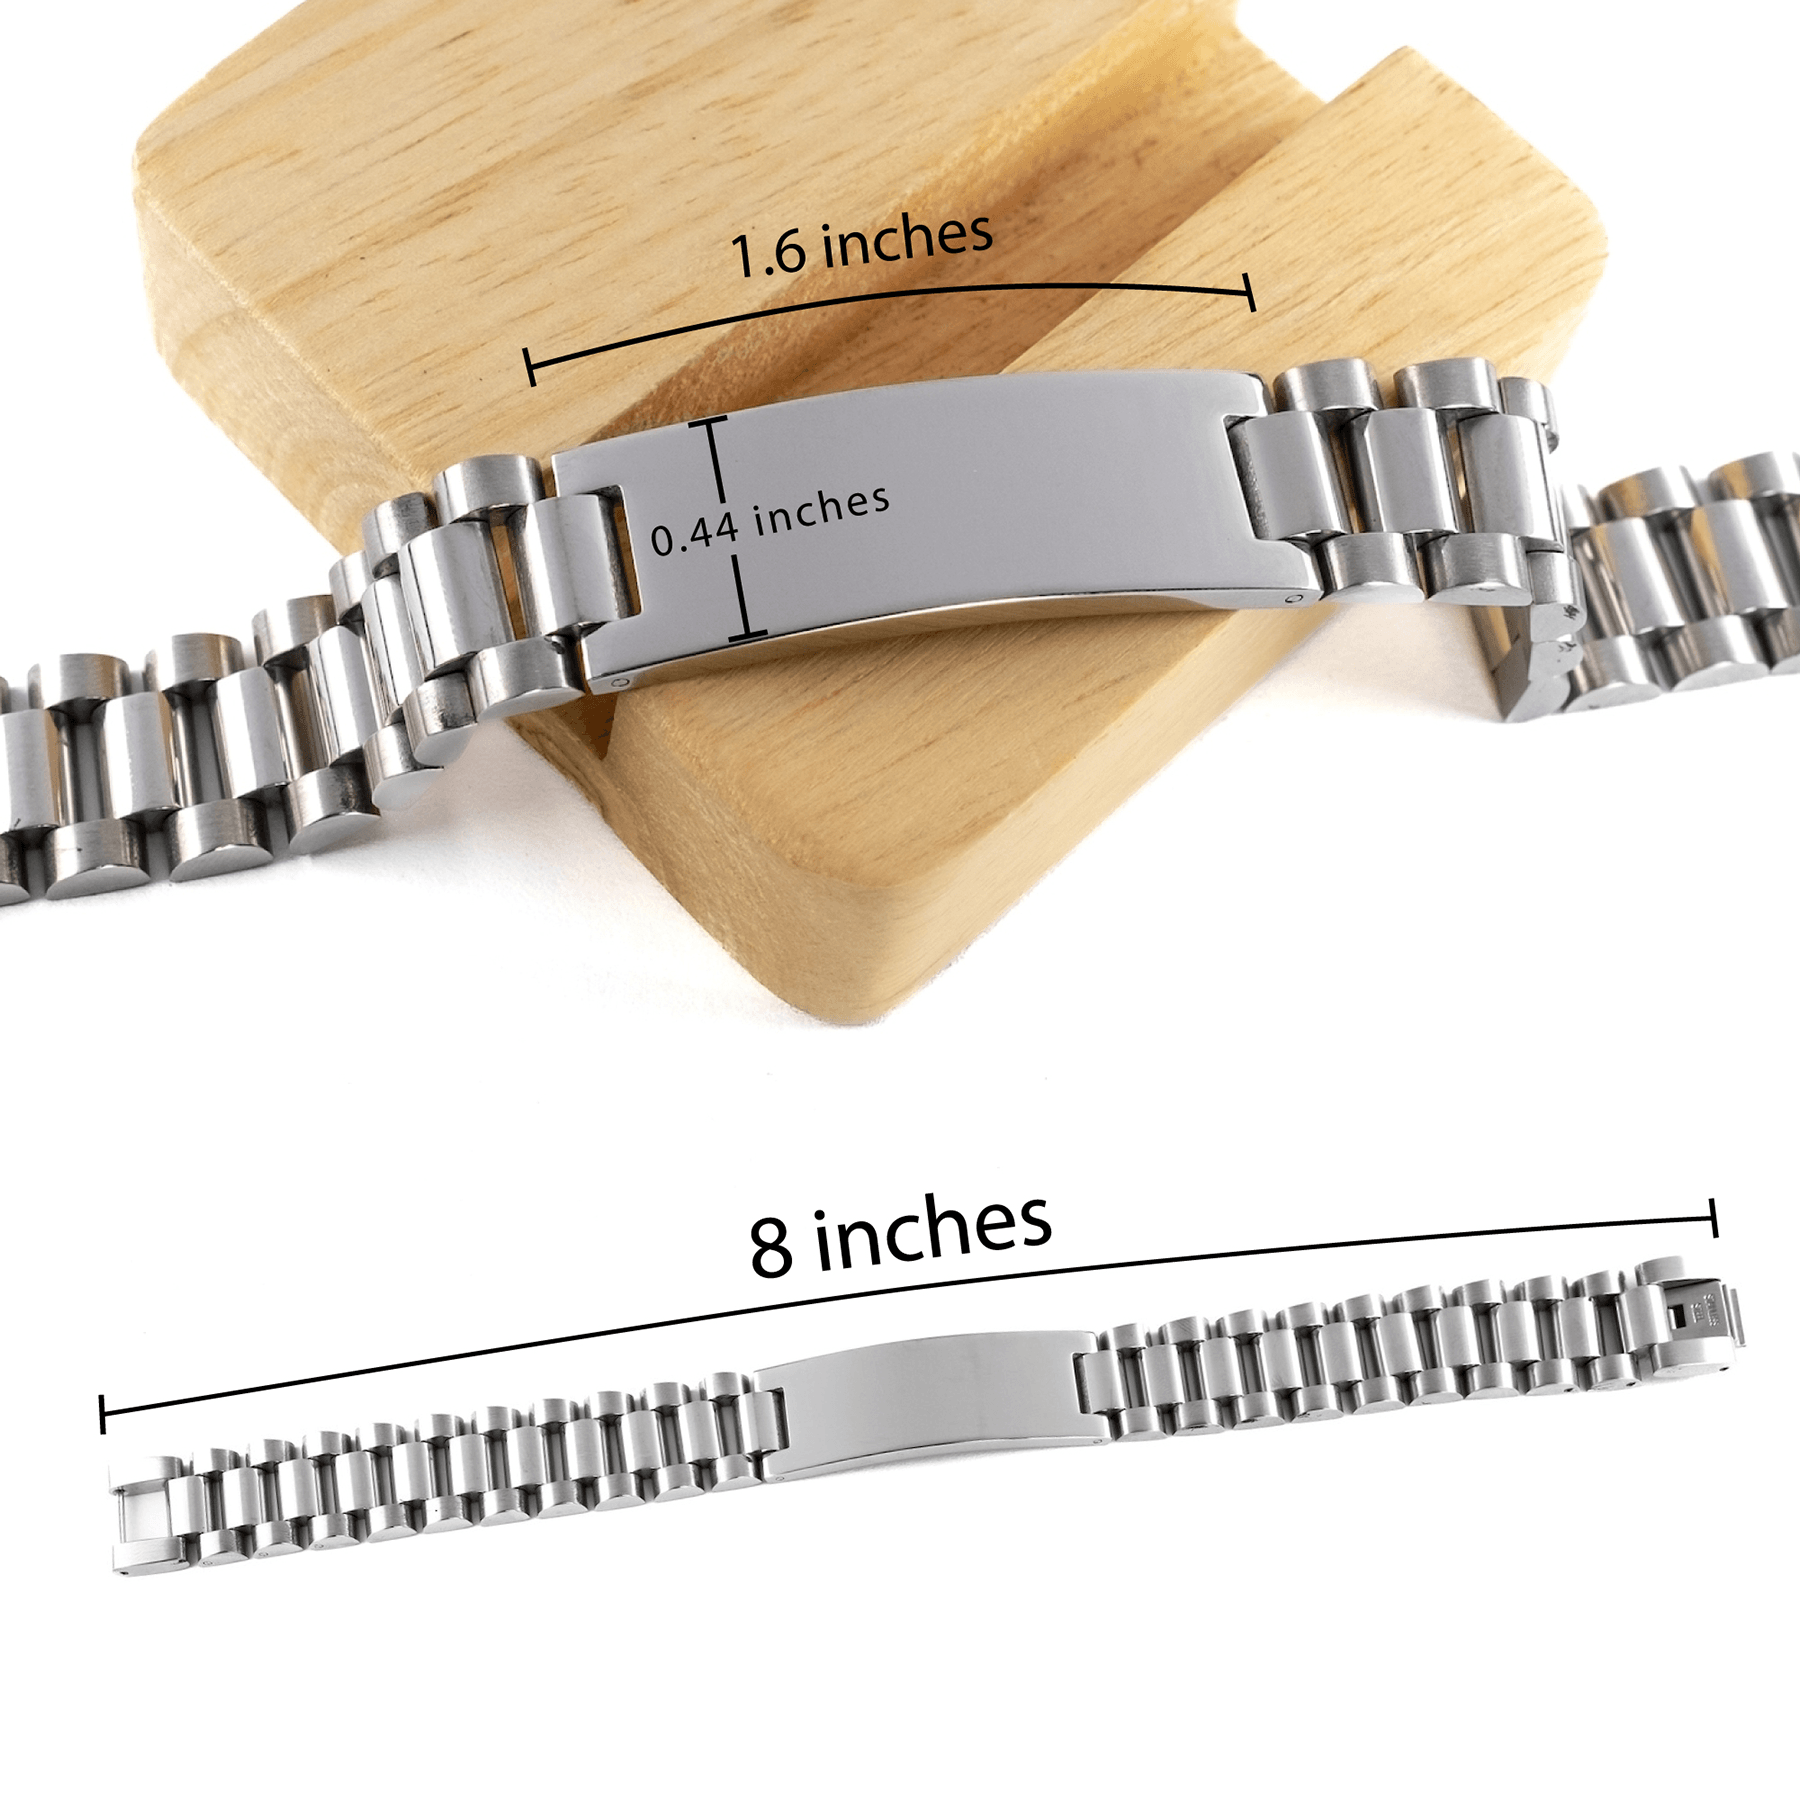 Sarcastic Electrical Engineer Ladder Stainless Steel Bracelet Gifts, Christmas Holiday Gifts for Electrical Engineer Birthday, Electrical Engineer: Because greatness is woven into the fabric of every day, Coworkers, Friends - Mallard Moon Gift Shop